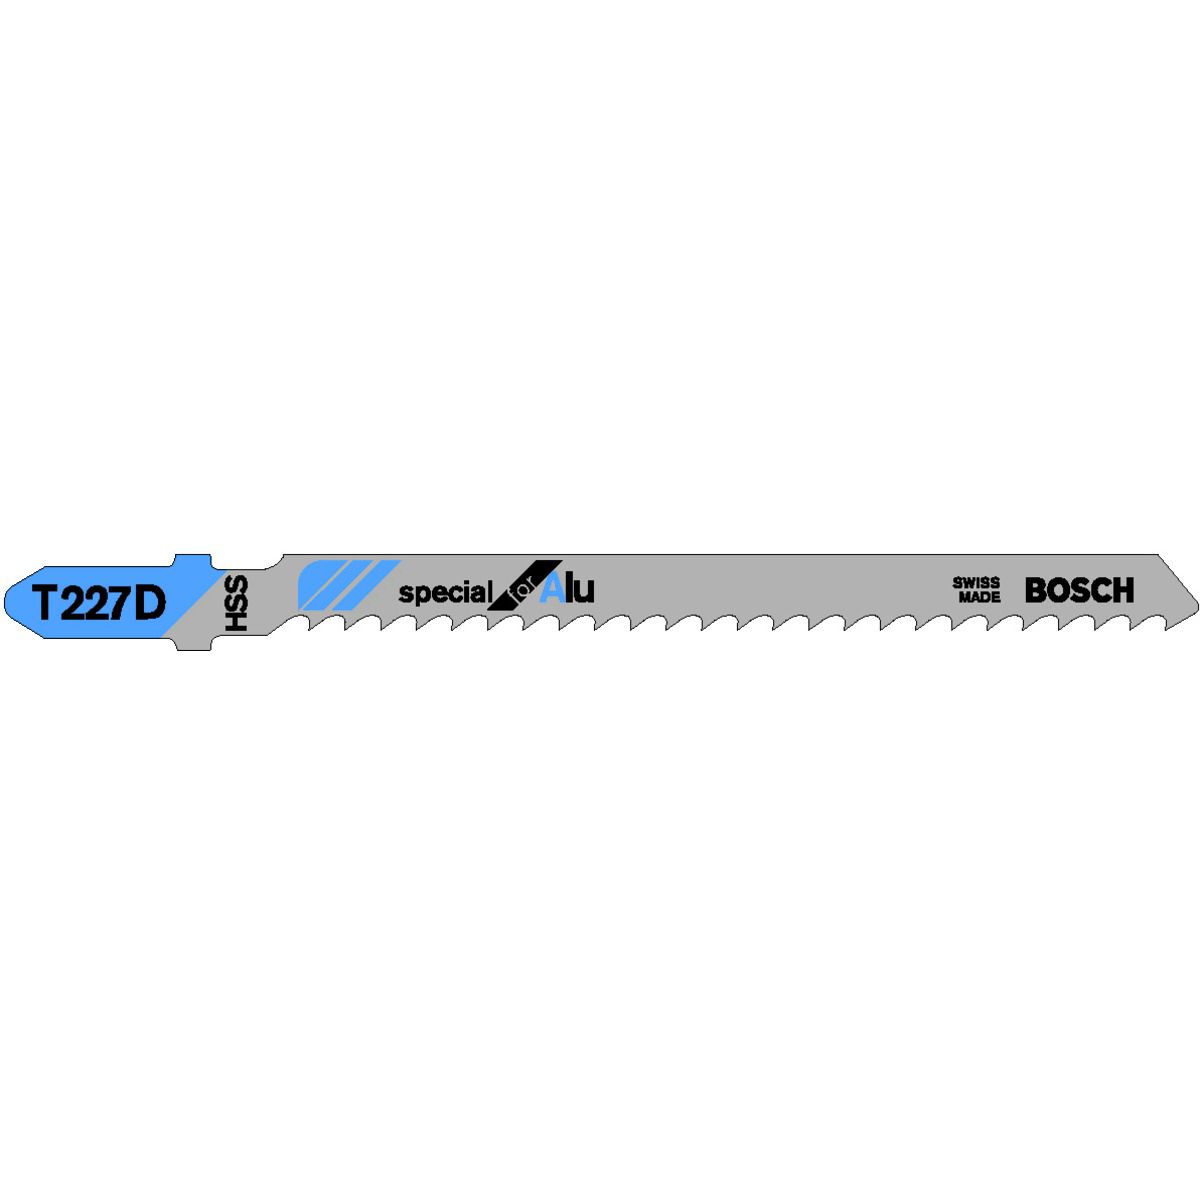 Image of Bosch T227D Metal Jigsaw Blades - Pack of 5